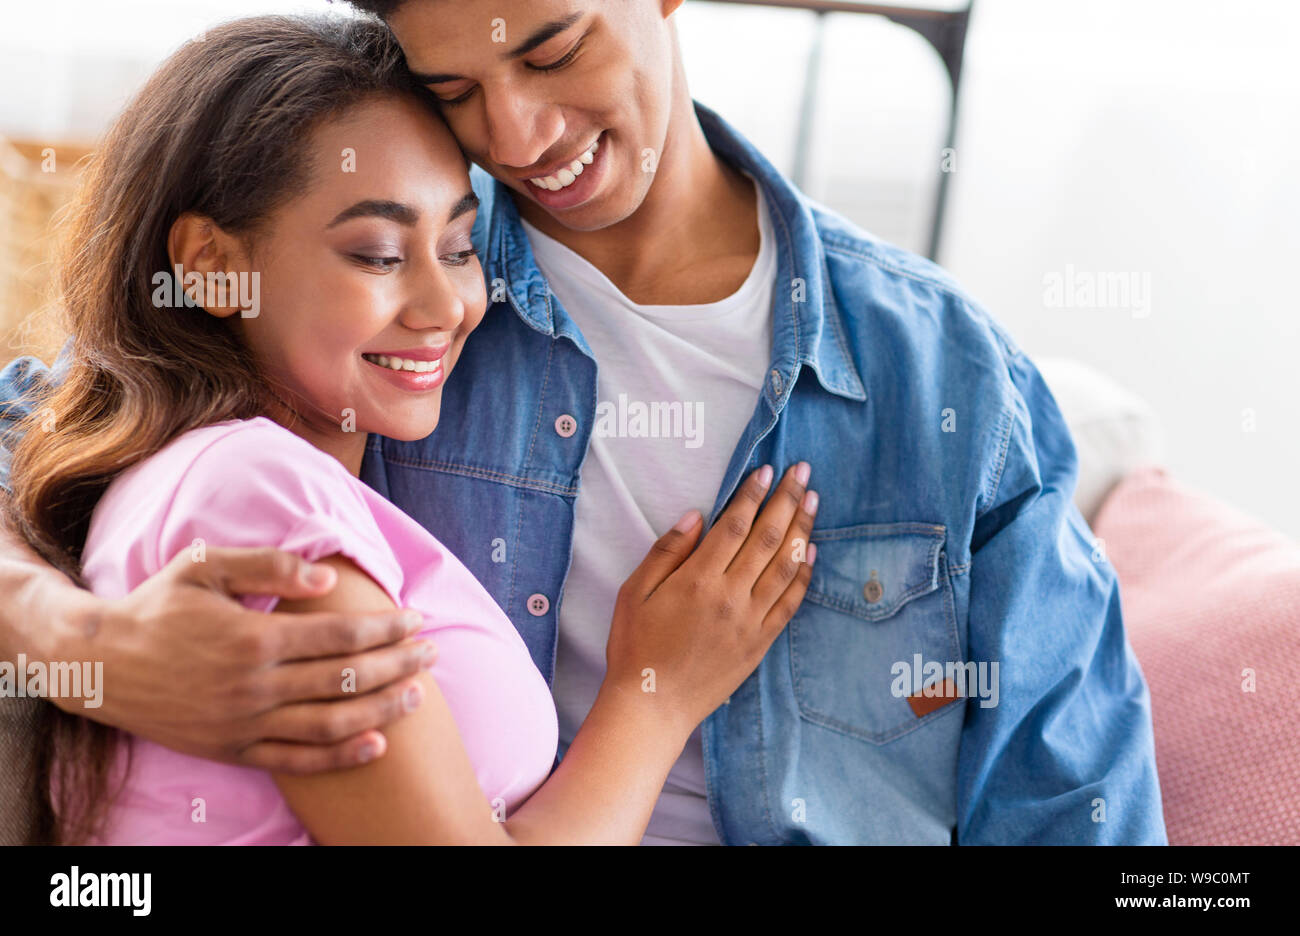 Romantic moment. Dreamy teen couple cuddling each other Stock Photo